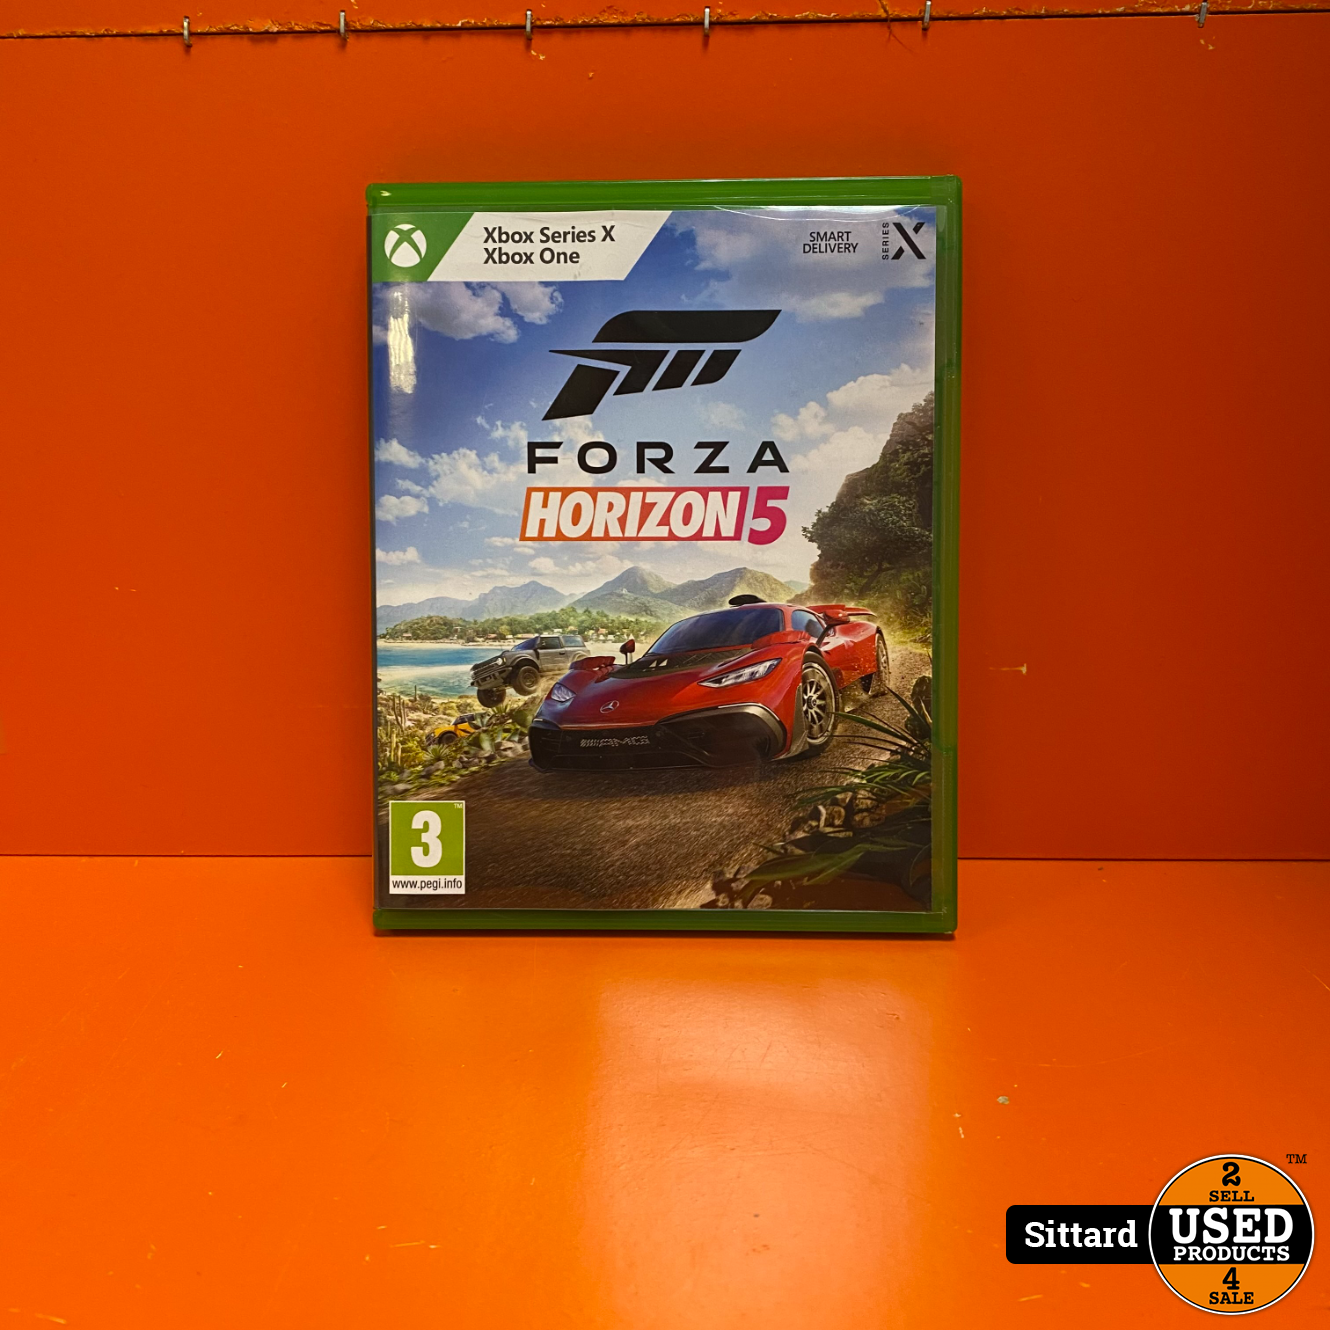 Smerig Een trouwe Technologie Xbox One / Series X-S game - Forza horizon 5 - Used Products Sittard